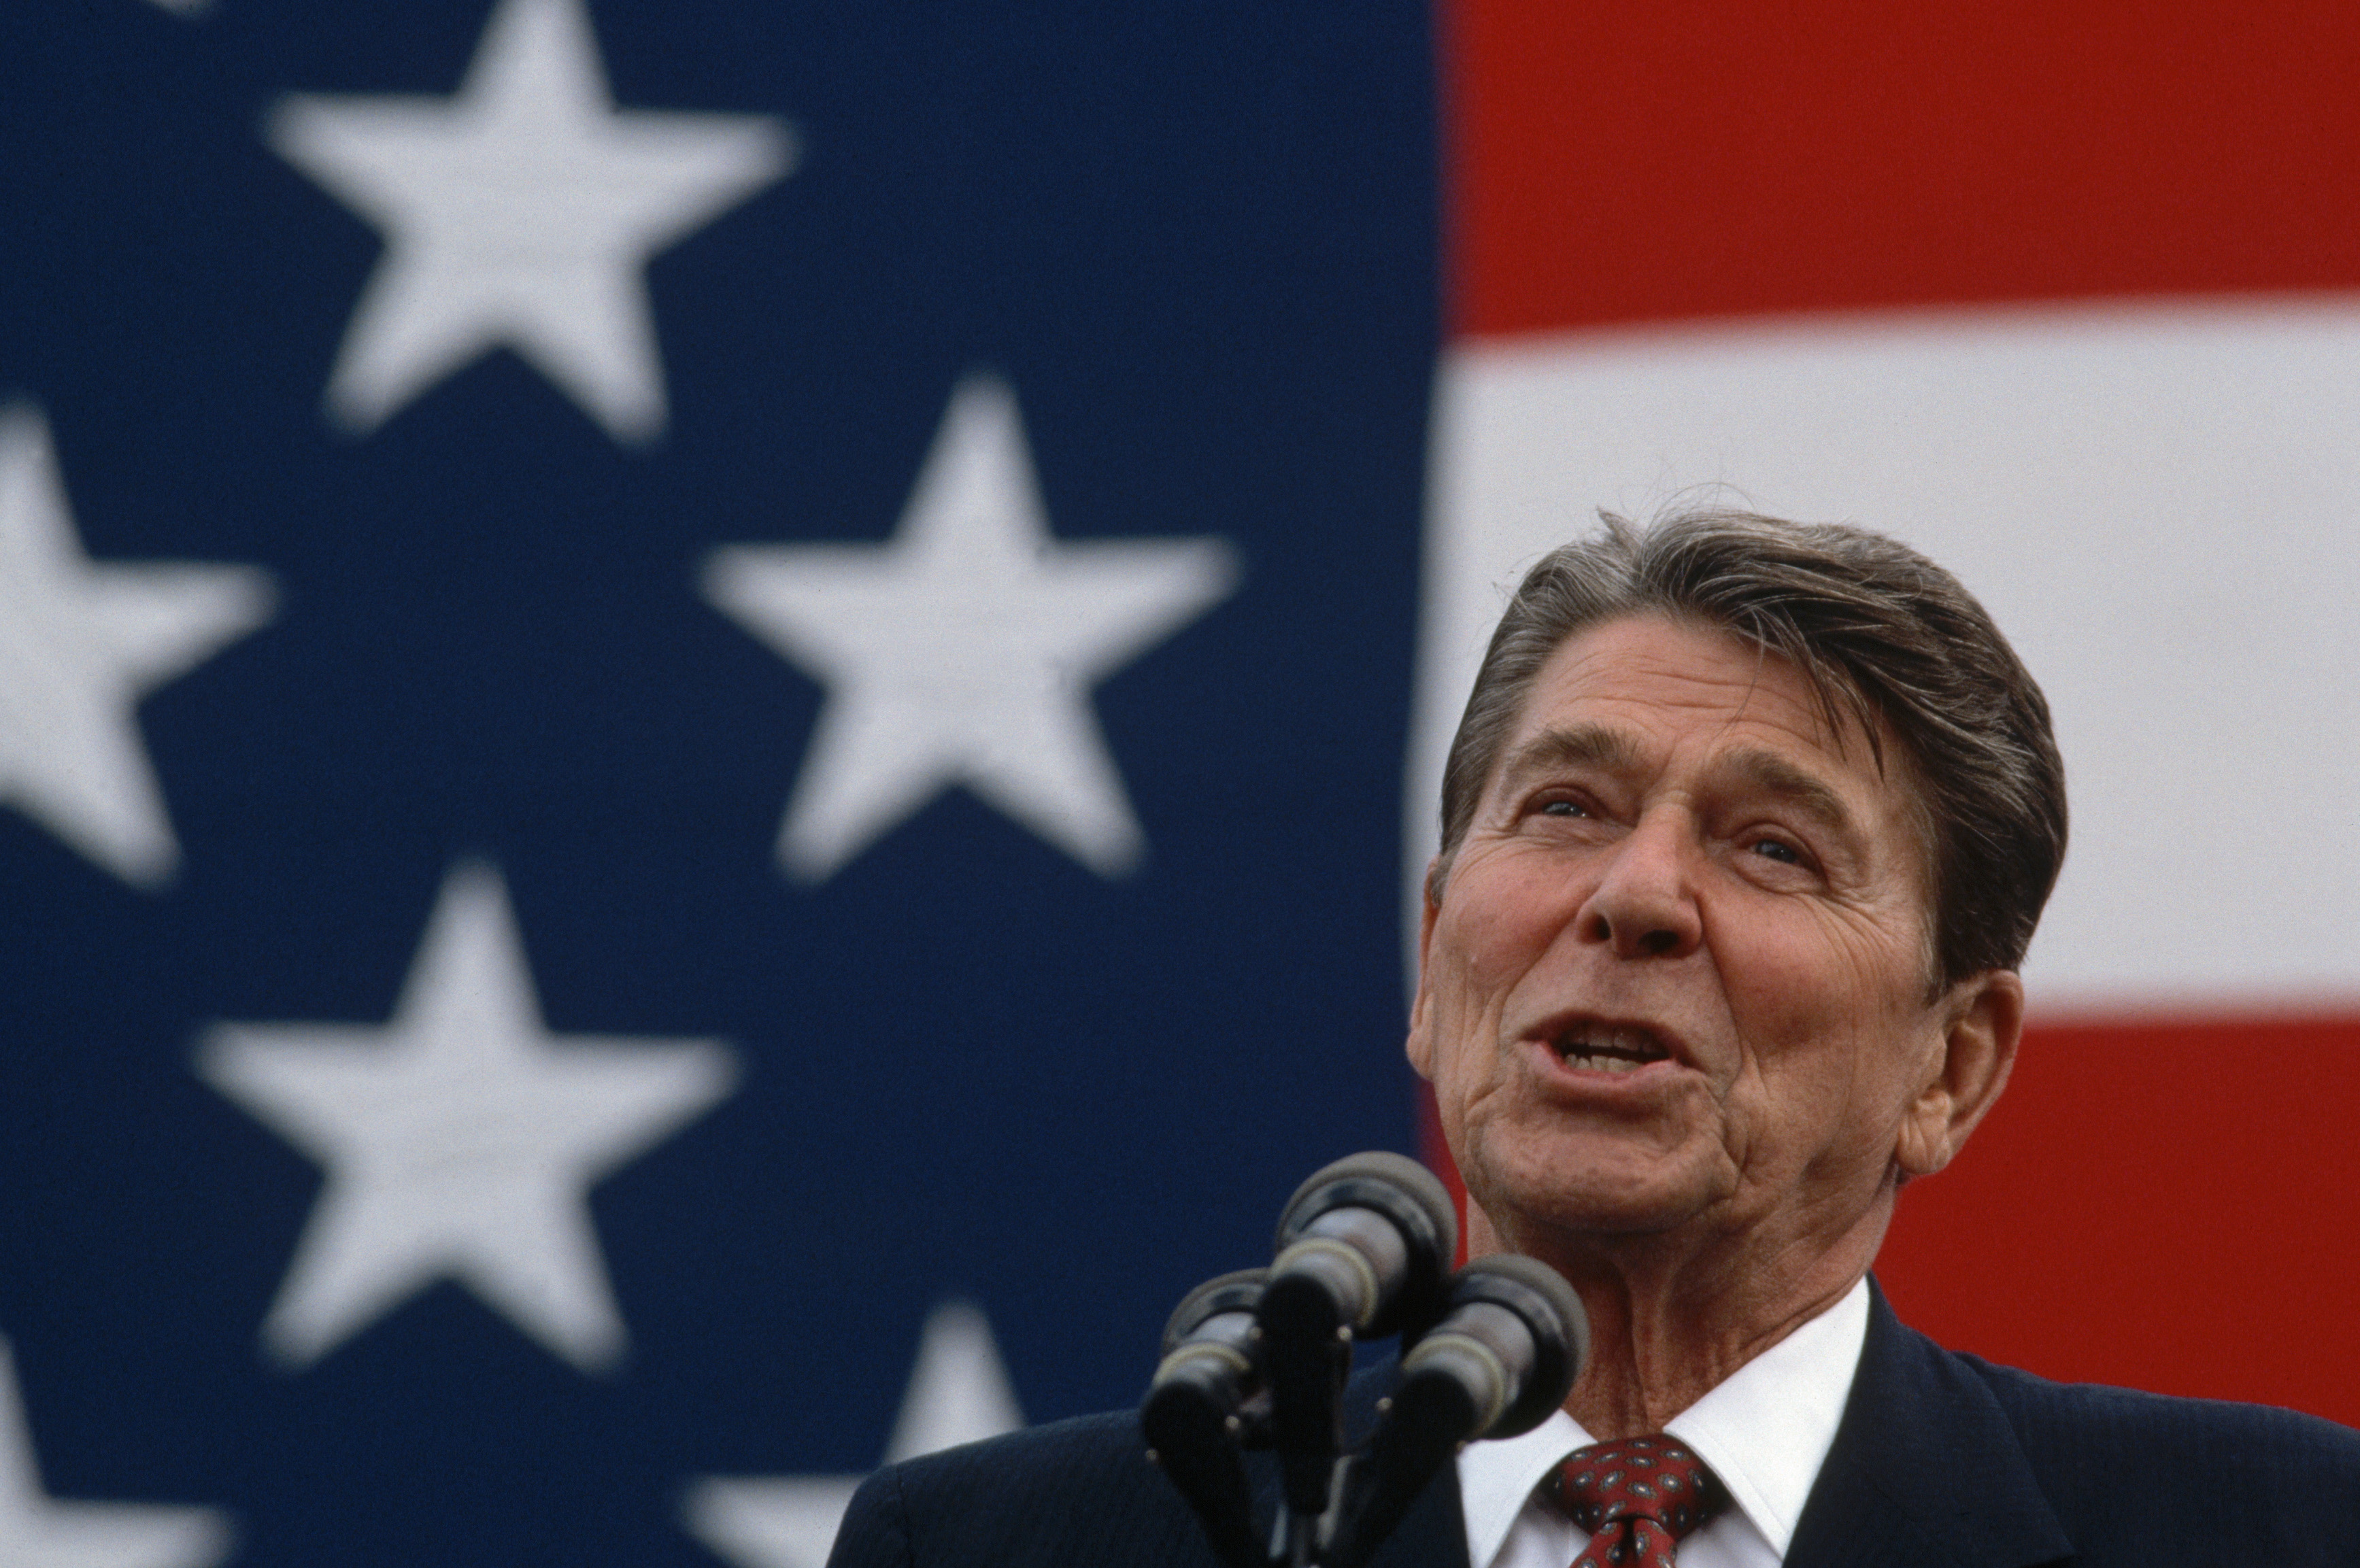 President Ronald Reagan makes a stump speech in front of a large American flag. (Photo by Wally McNamee/CORBIS via Getty Images)